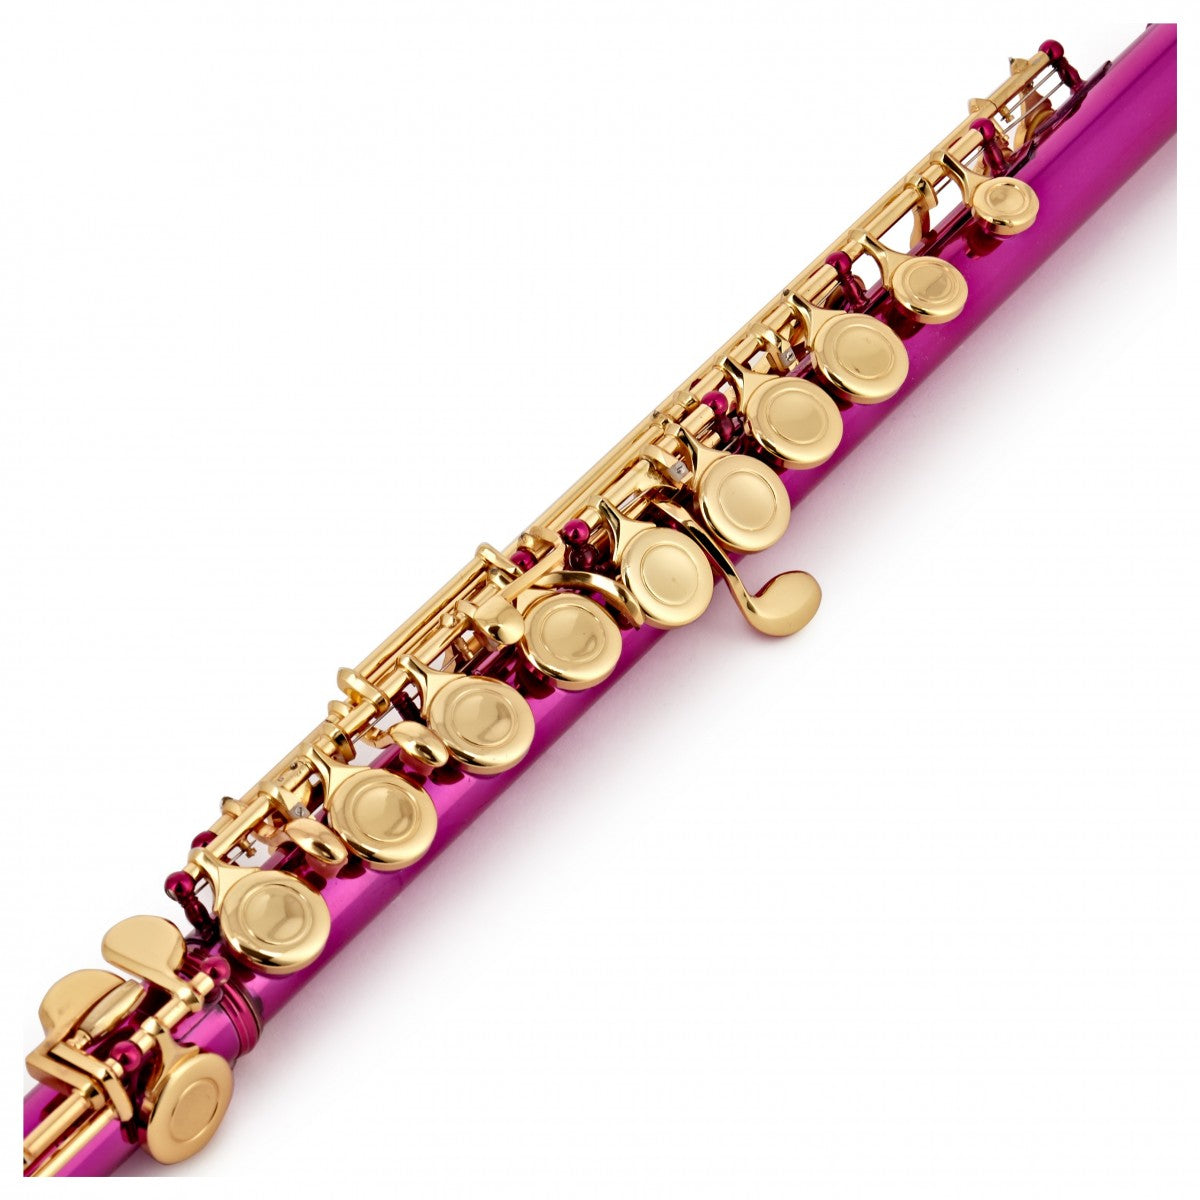 Elkhart by Vincent Bach Flute 100FLP with Case in Pink | Spilt E Mechanism Offset G - RRP £279 Buy Now in Sale At Half Price For £139 - Only Few Left!